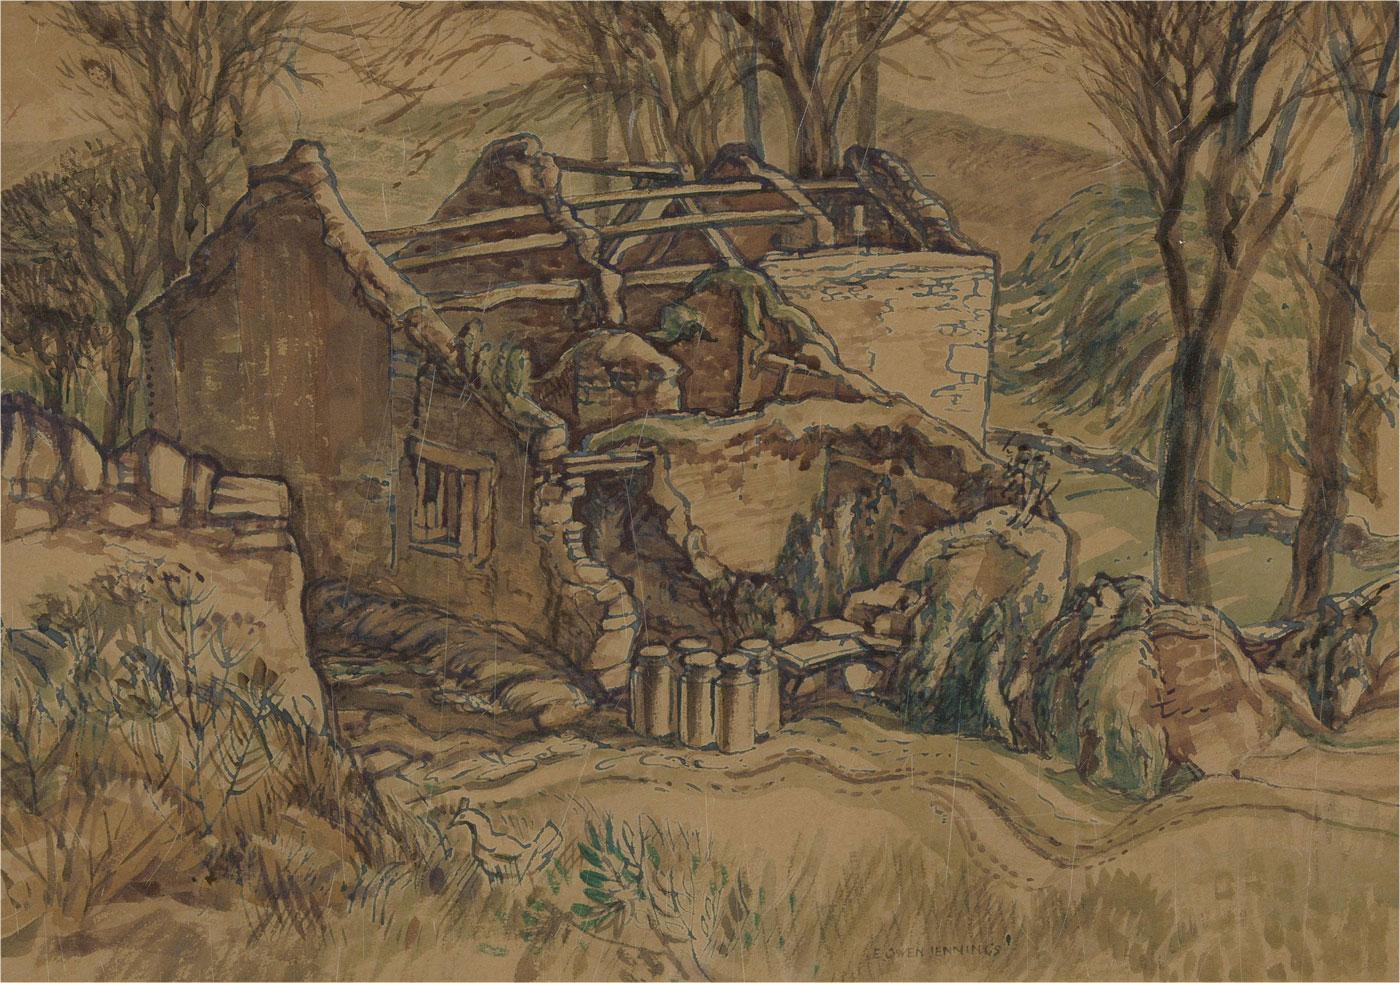 A characterful watercolour showing the ruin of an old dairy with milk churns lined up outside. The ruin is surrounded by trees and a chicken wanders the foreground. The painting has been signed at the lower edge. The painting has been presented in a